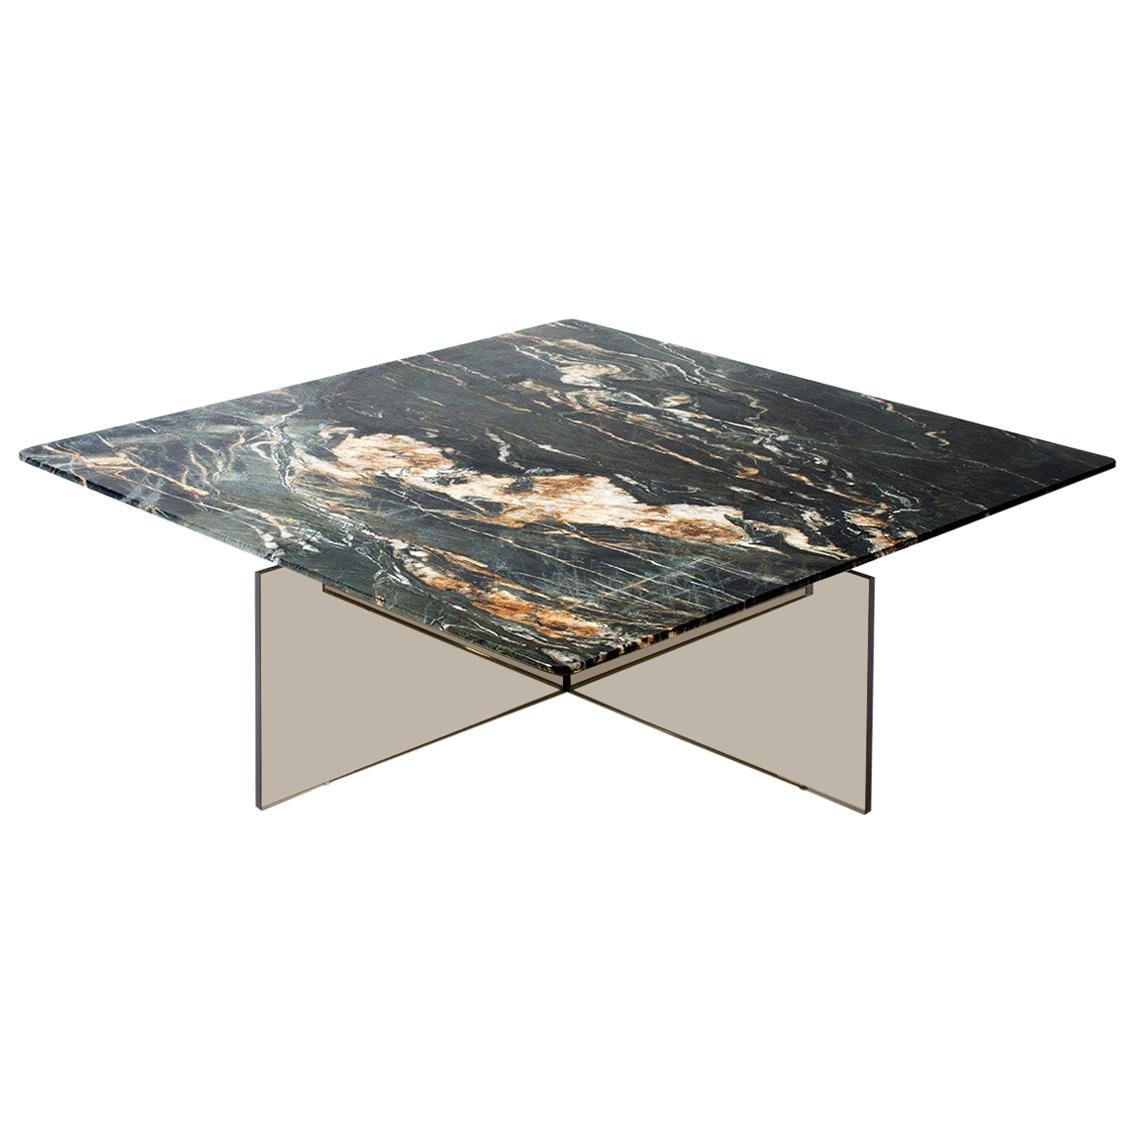 Claste Beside Myself Small Coffee Table in Belvedere Black Marble and Glass Base For Sale